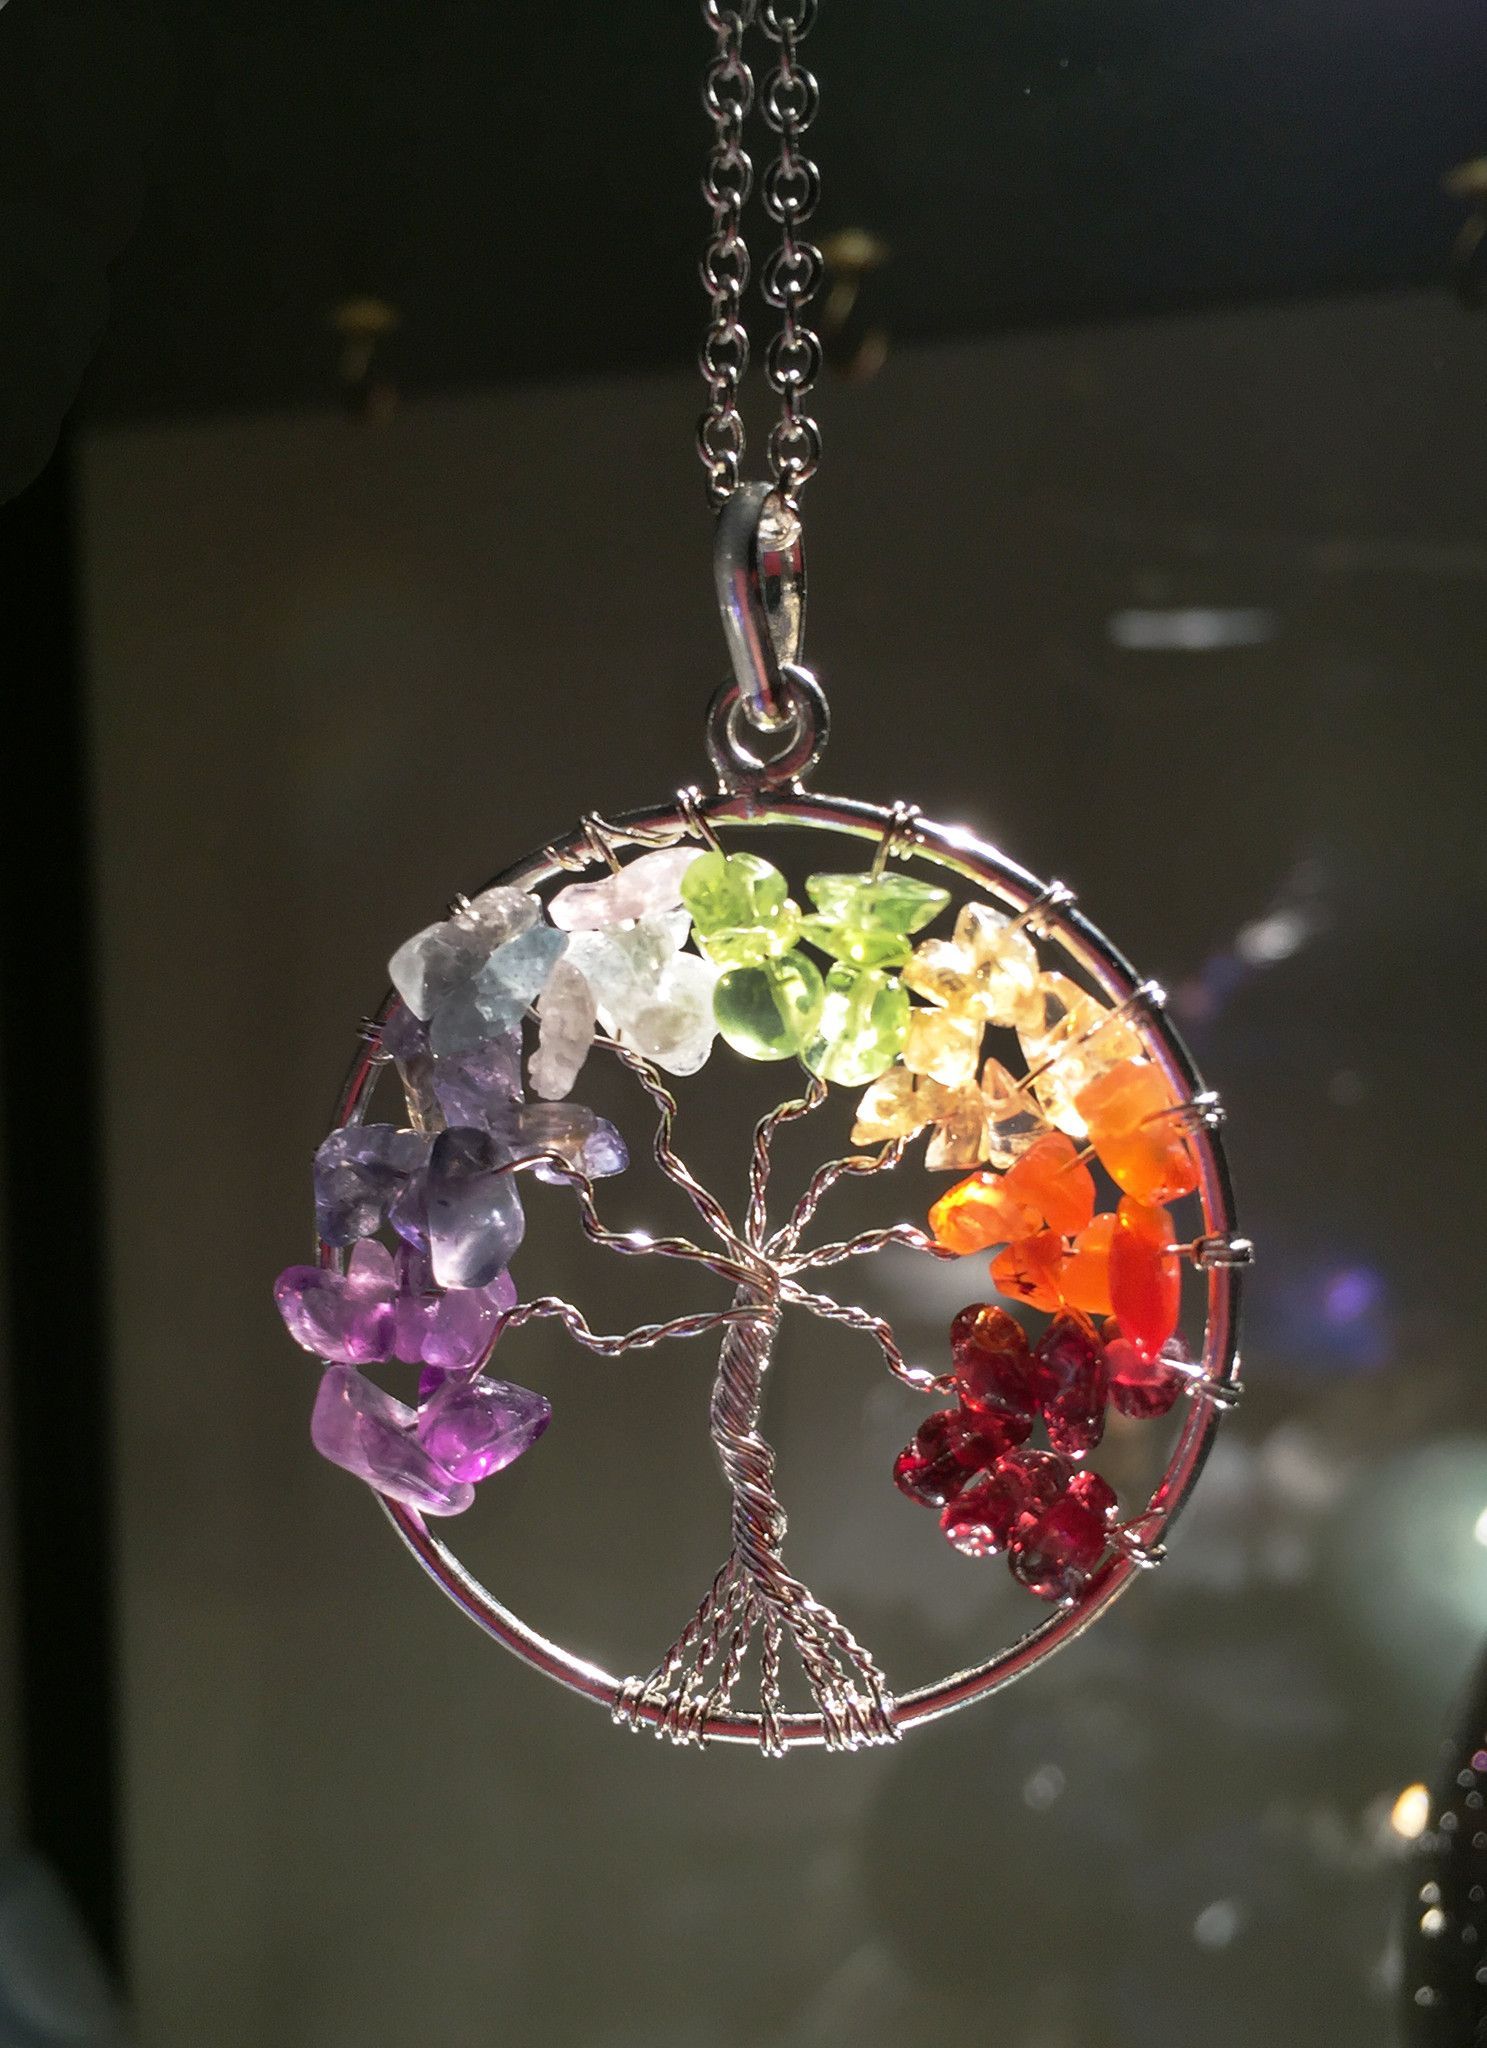 tree of life wire wrap tutorial